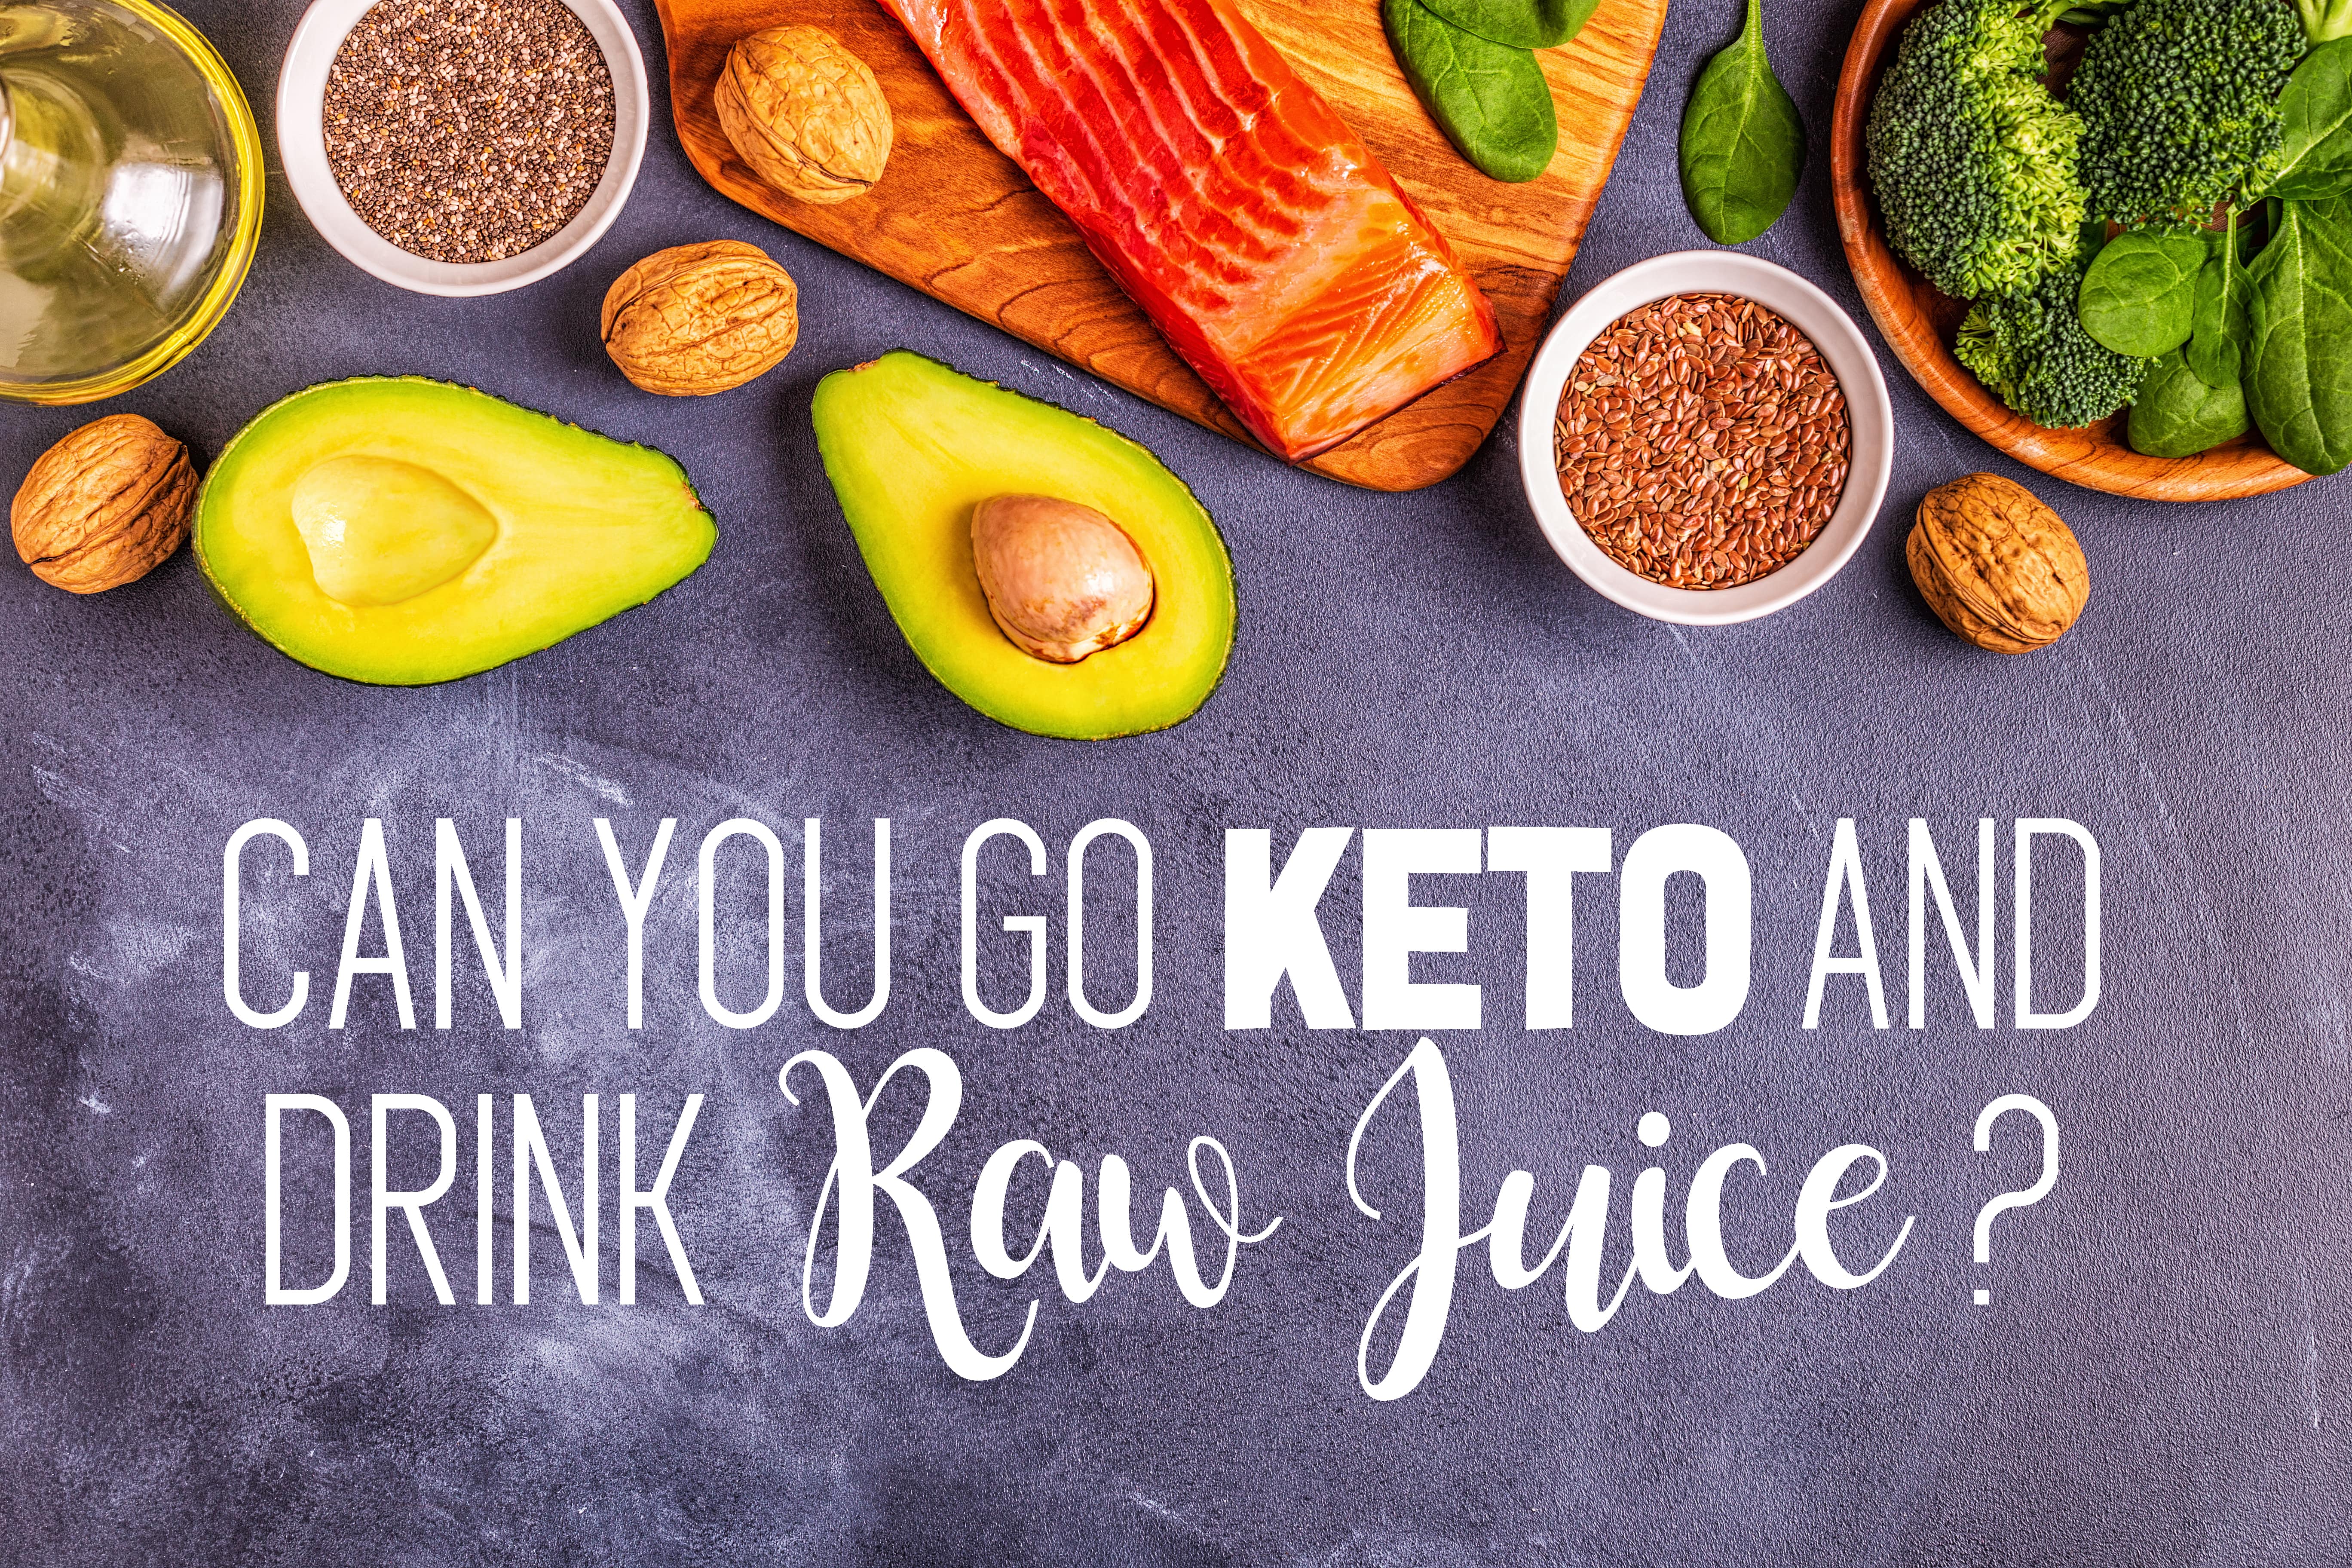 Can You Go Keto and Drink Raw Juice?